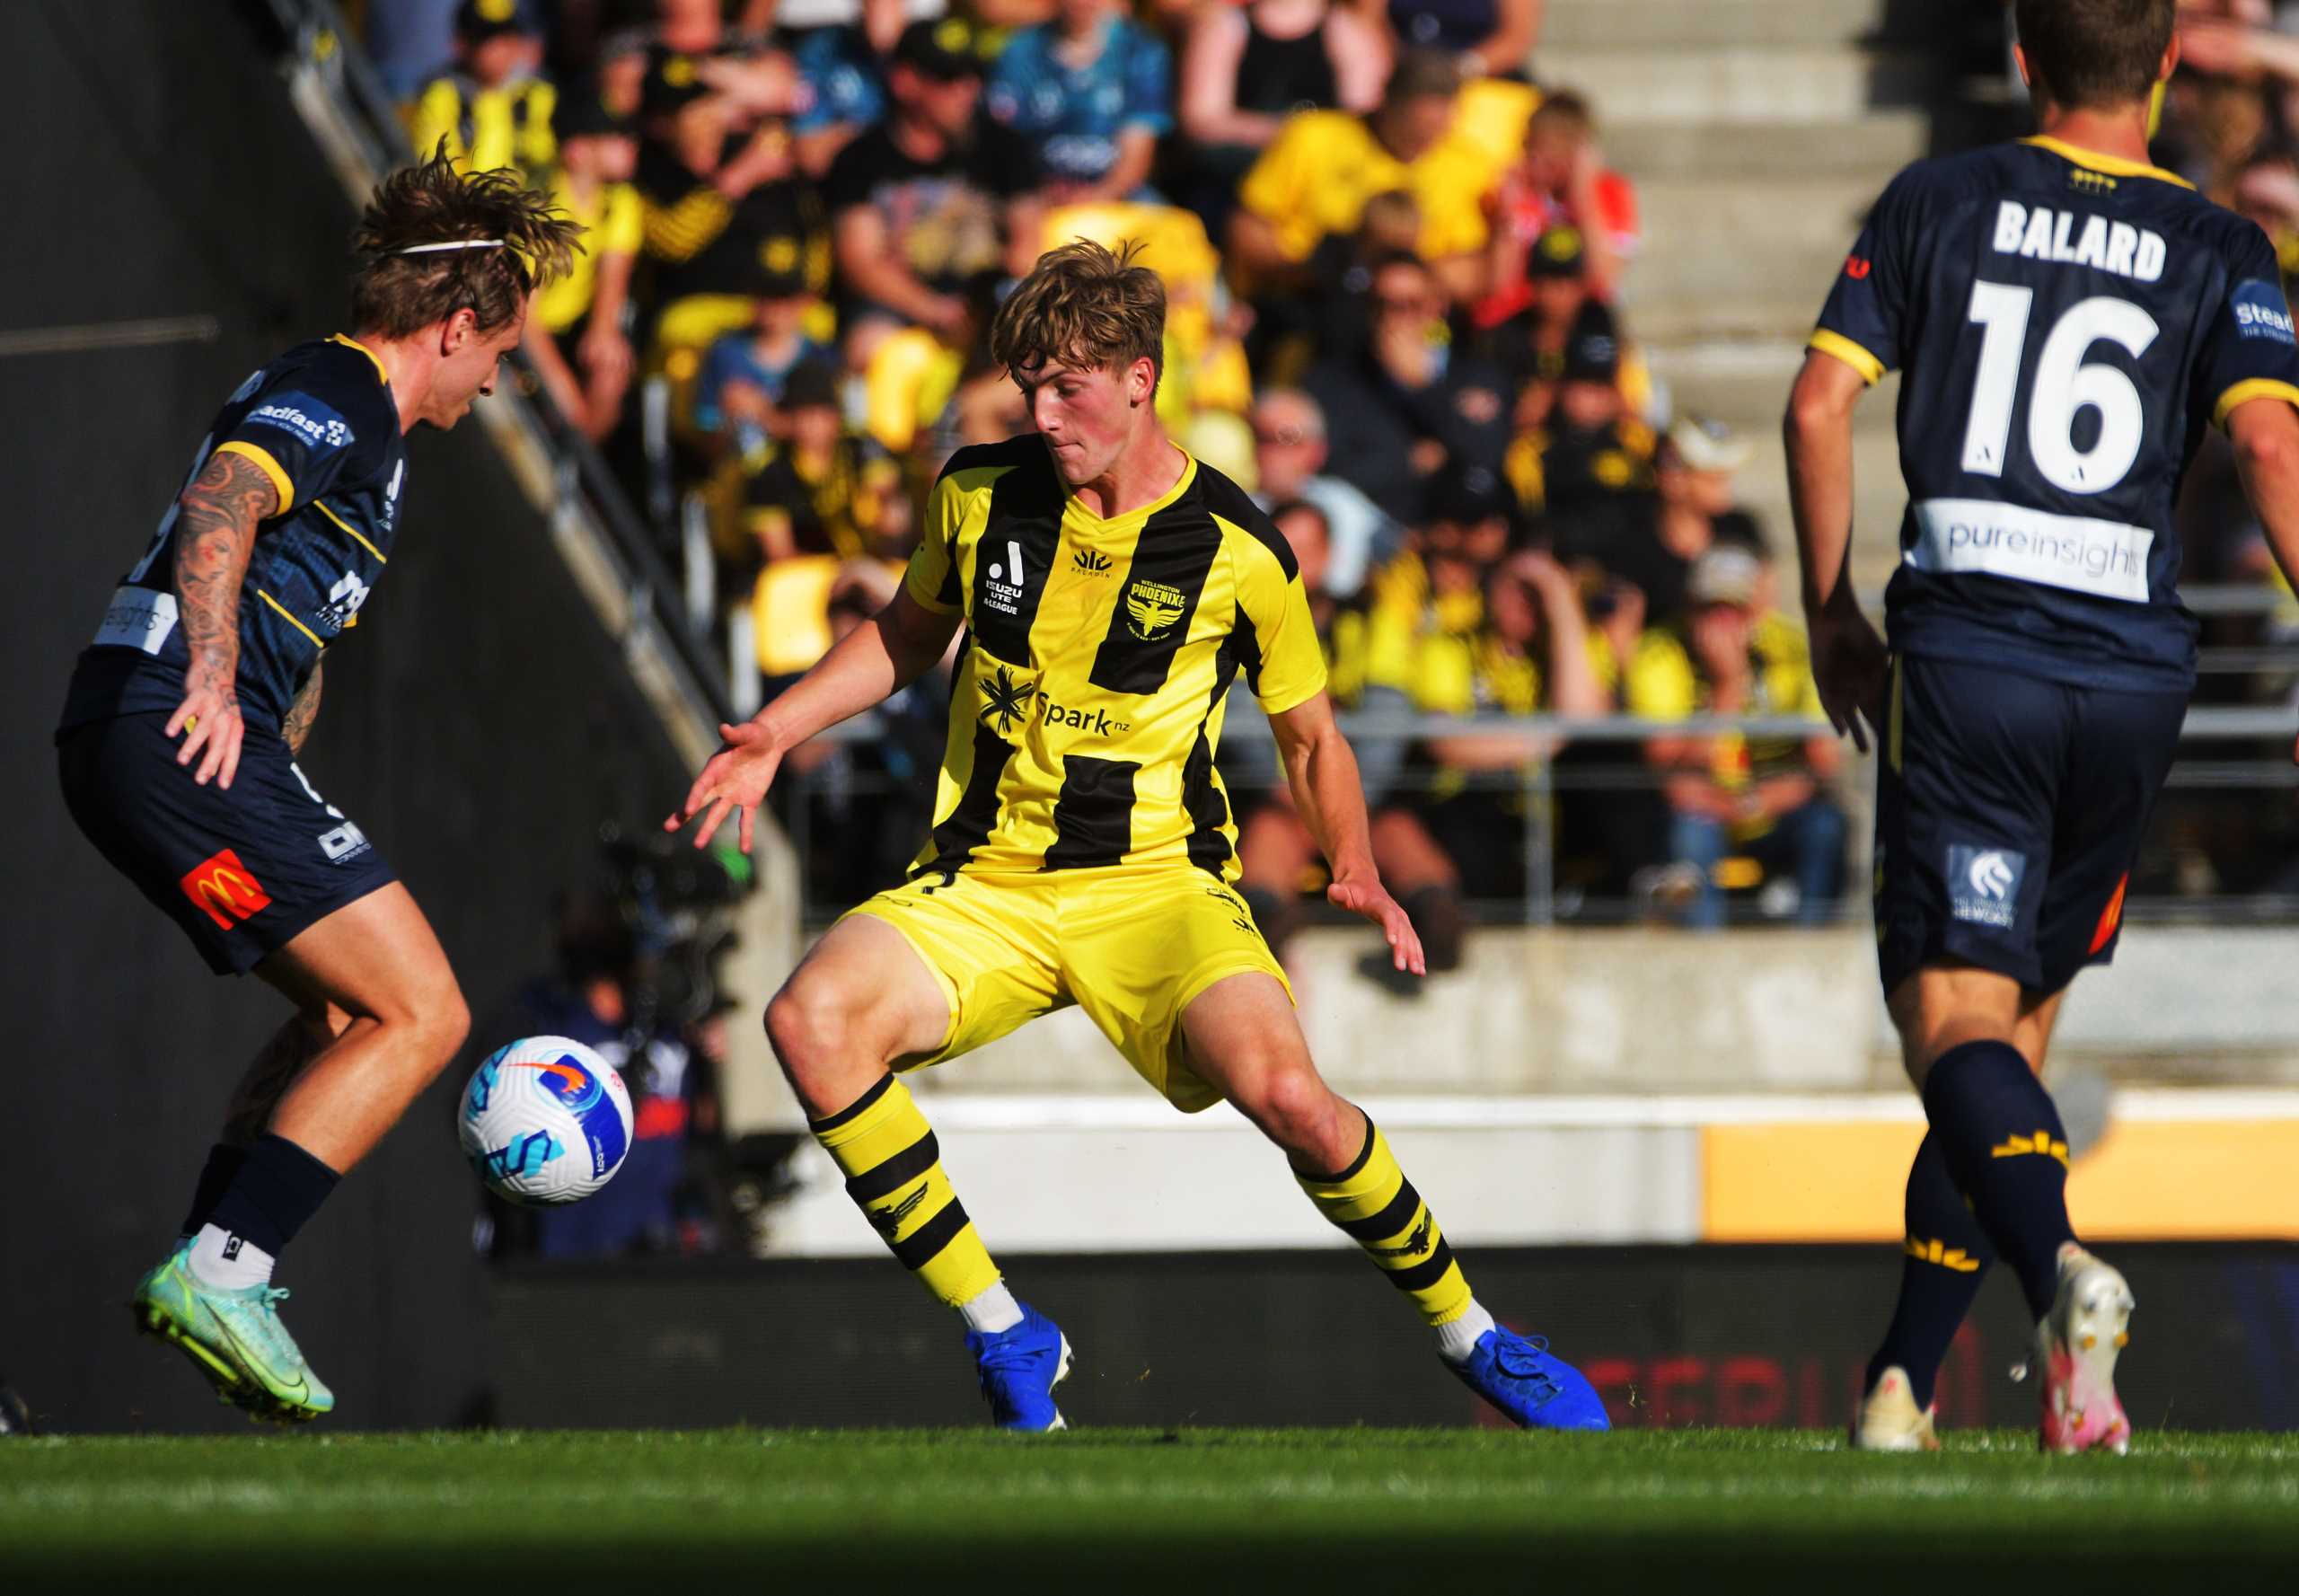 CCM's Jason Cummings (left) and Phoenix' Finn Surman compete for the ball during the A-League football match between Wellington Phoenix and Central Coast Mariners at Westpac Stadium in Wellington, New Zealand on Sunday, 17 April 2022. Photo: Dave Lintott / lintottphoto.co.nz